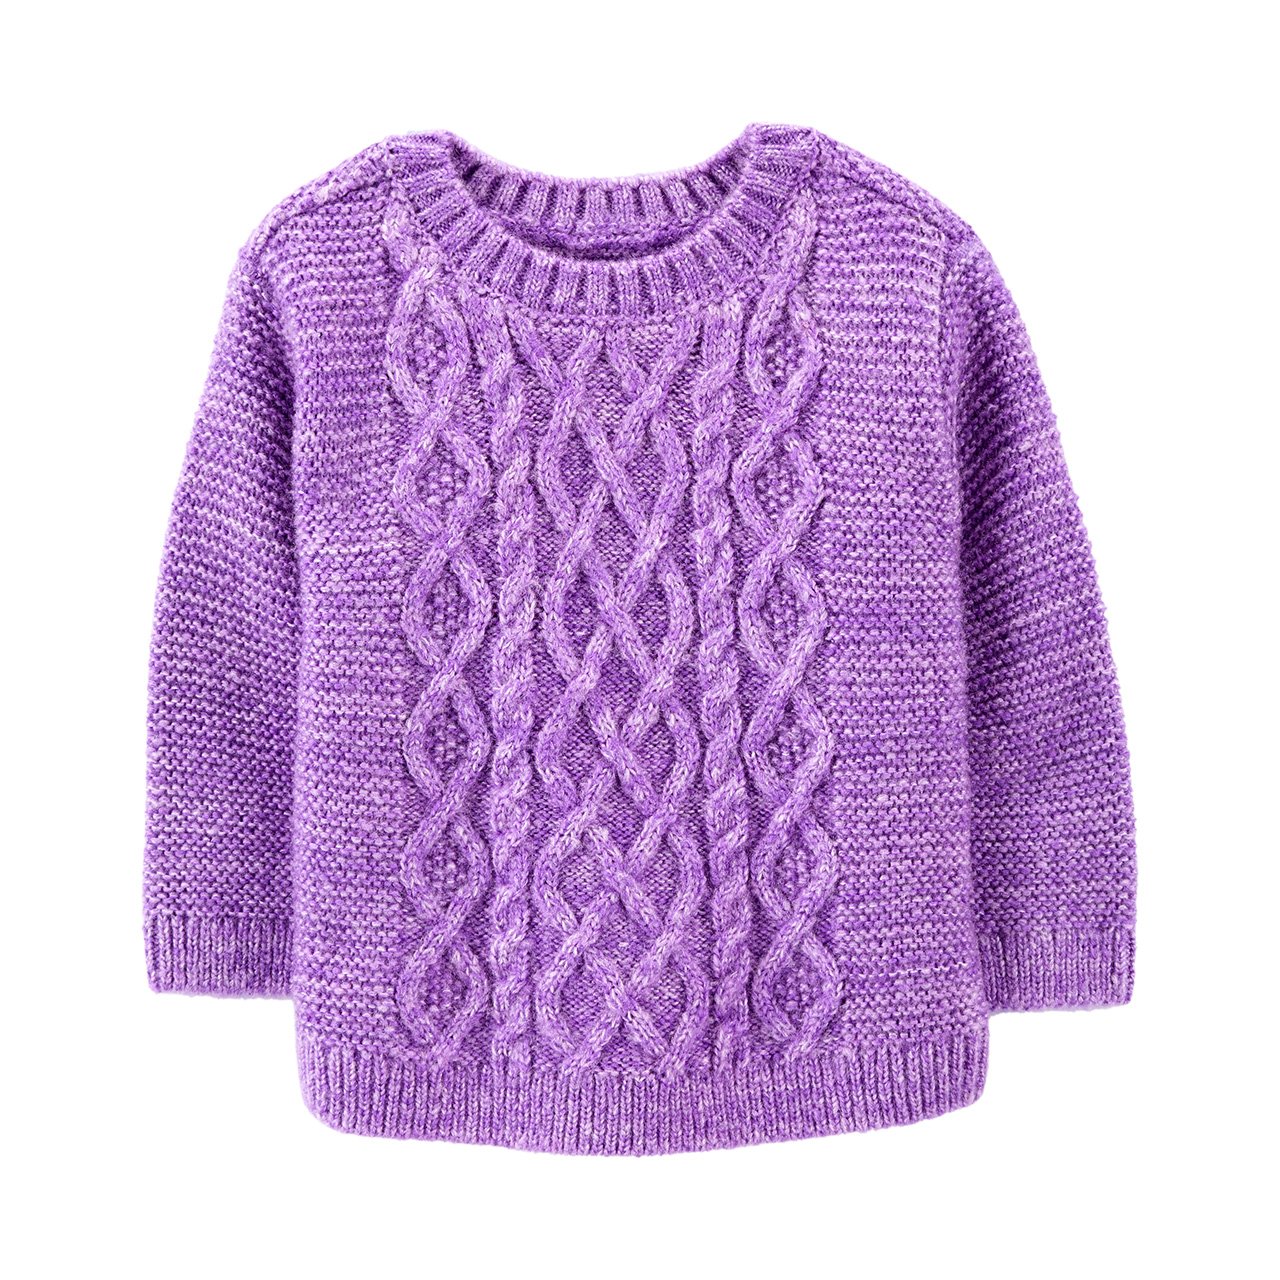 A light purple sweater for babies.